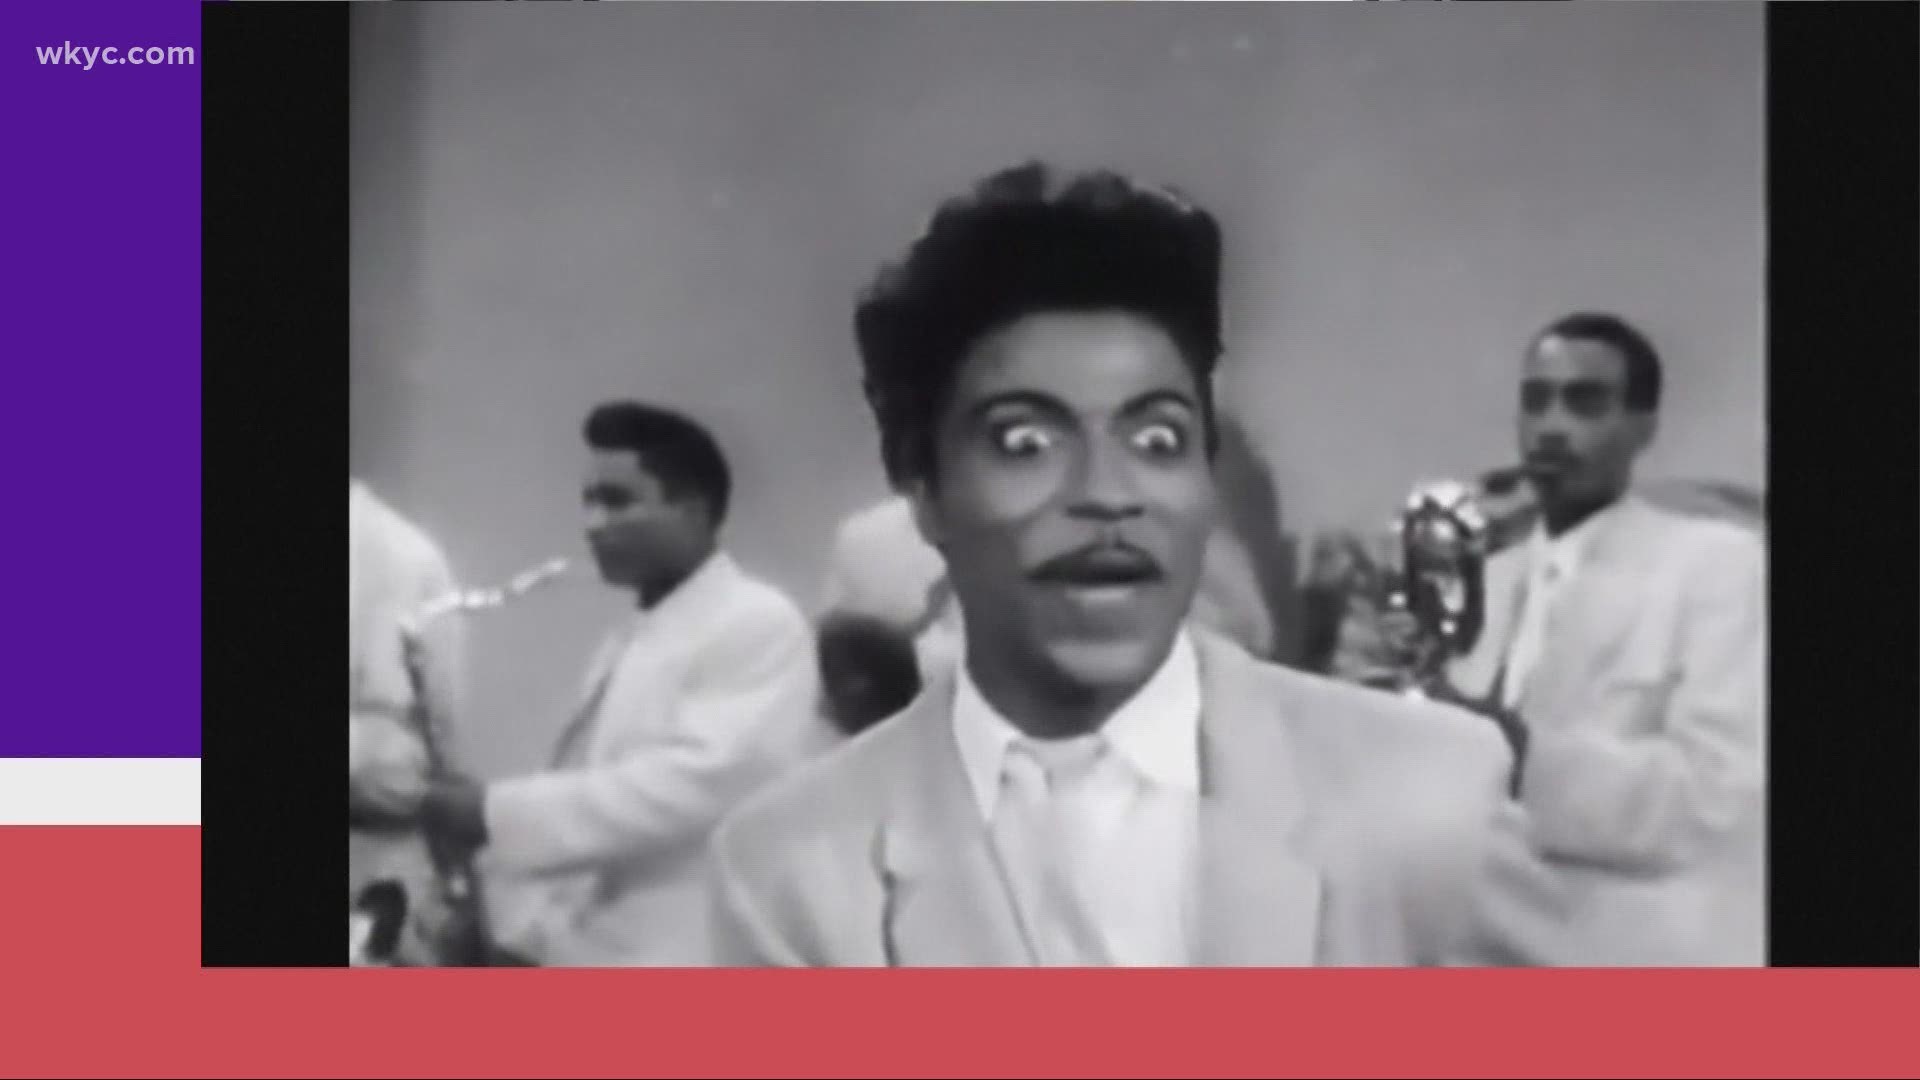 Music historians recall Little Richard's impact on the industry following his death on Saturday.